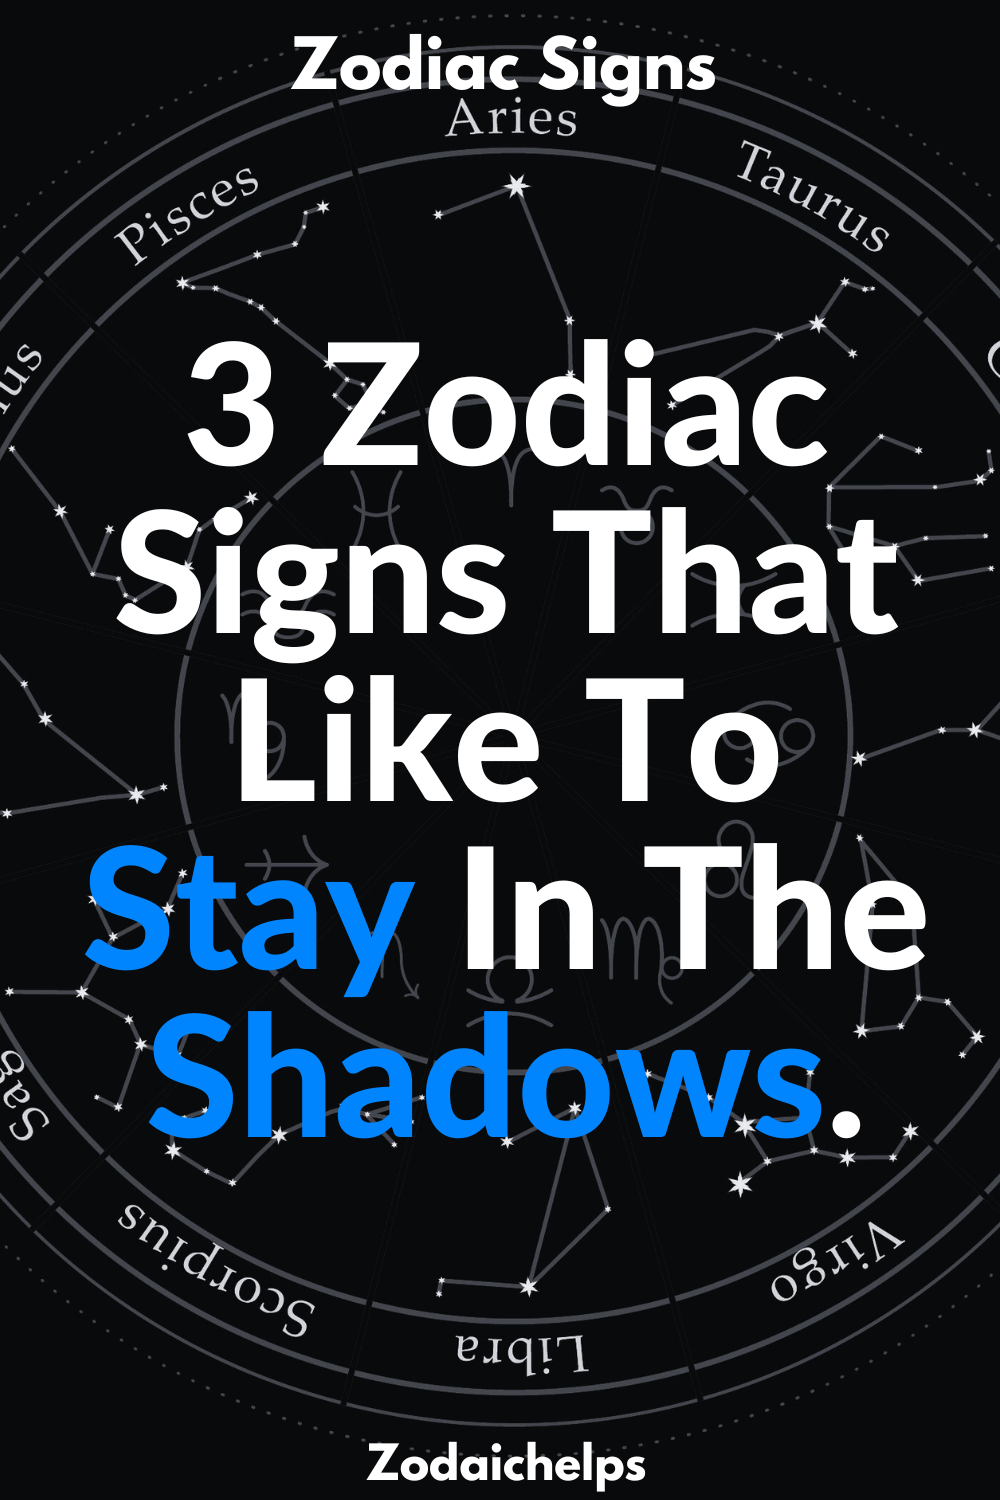 3 Zodiac Signs That Like To Stay In The Shadows.